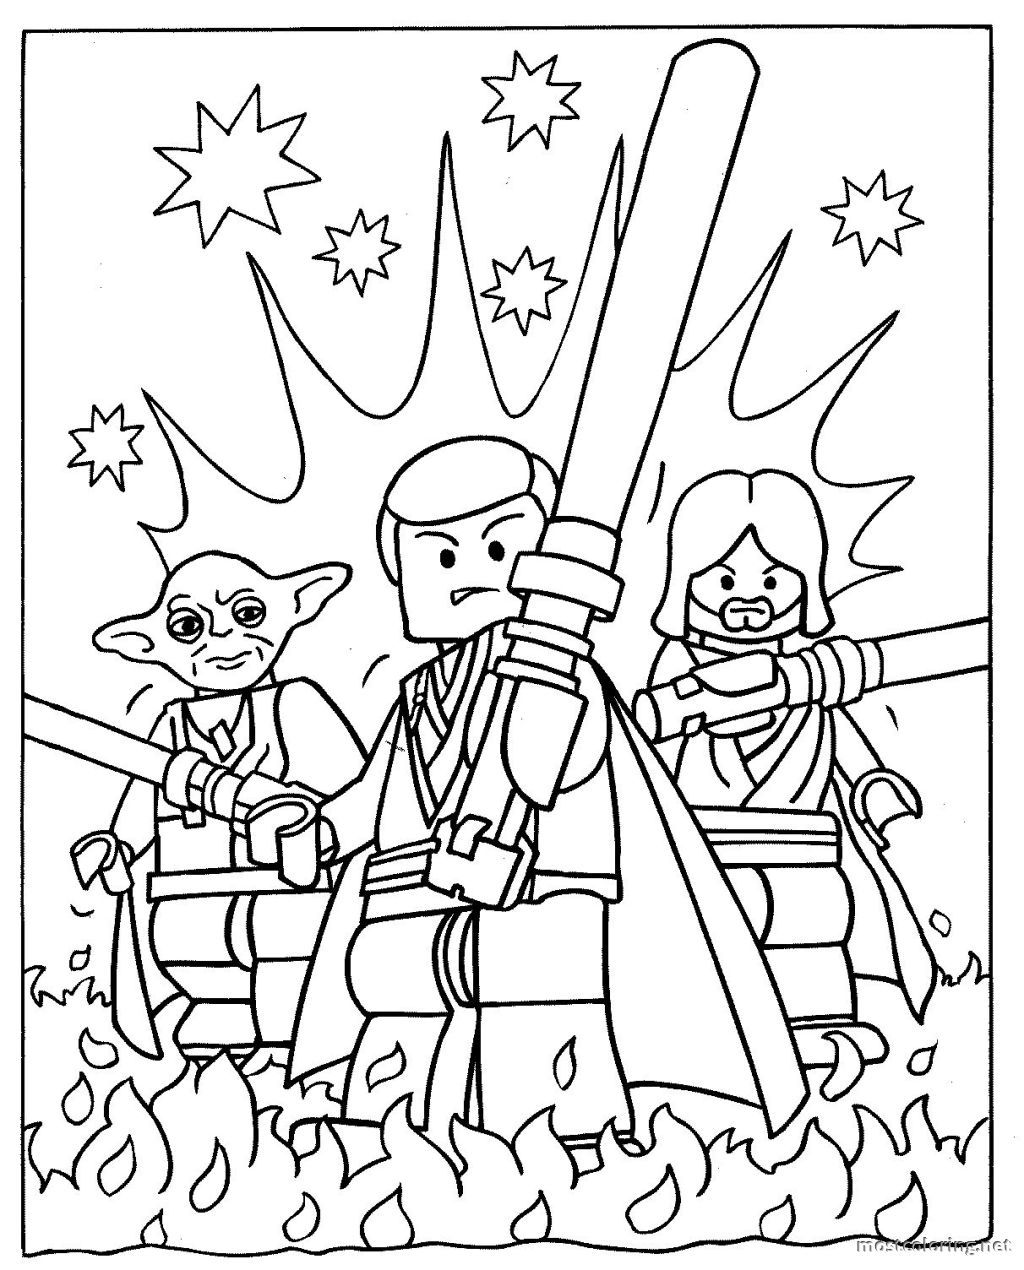 Lego Star Wars Coloring Pages | Coloring Pages Printable